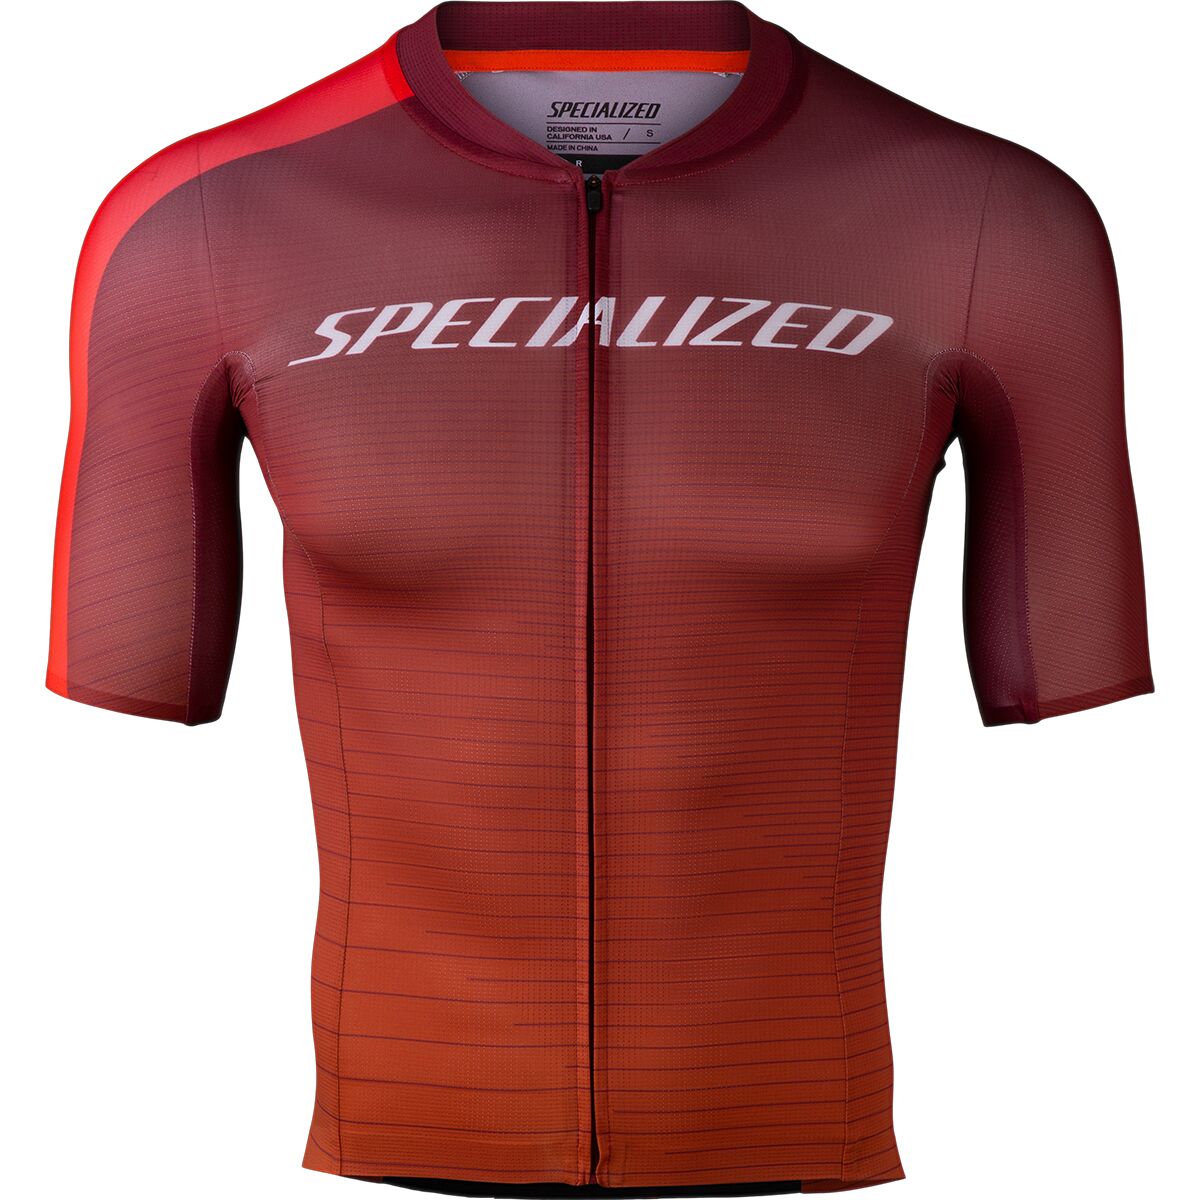 Specialized SL Race Jersey Men's Competitive Cyclist